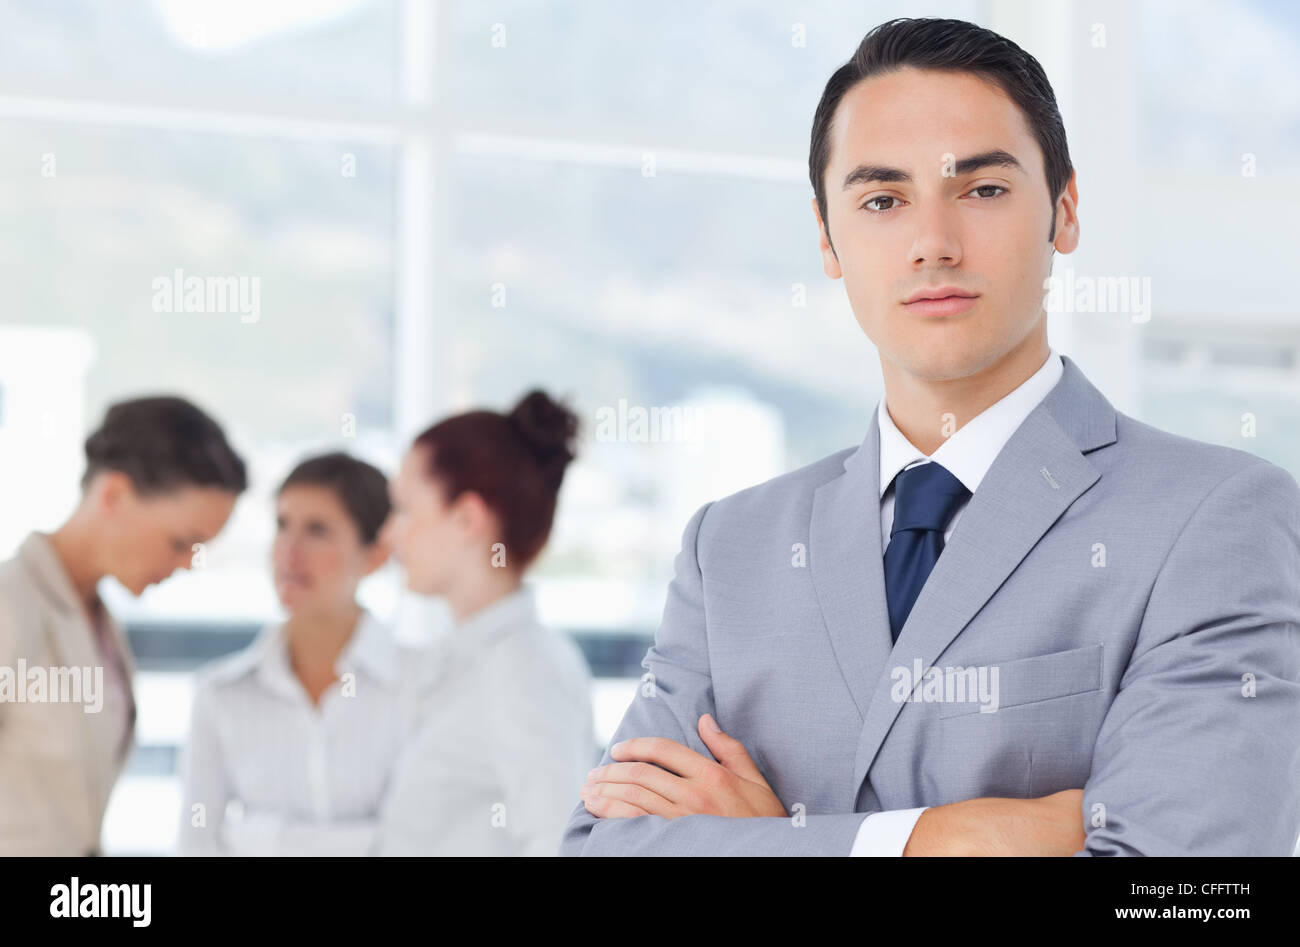 Businessman with arms crossed and colleagues behind him Stock Photo